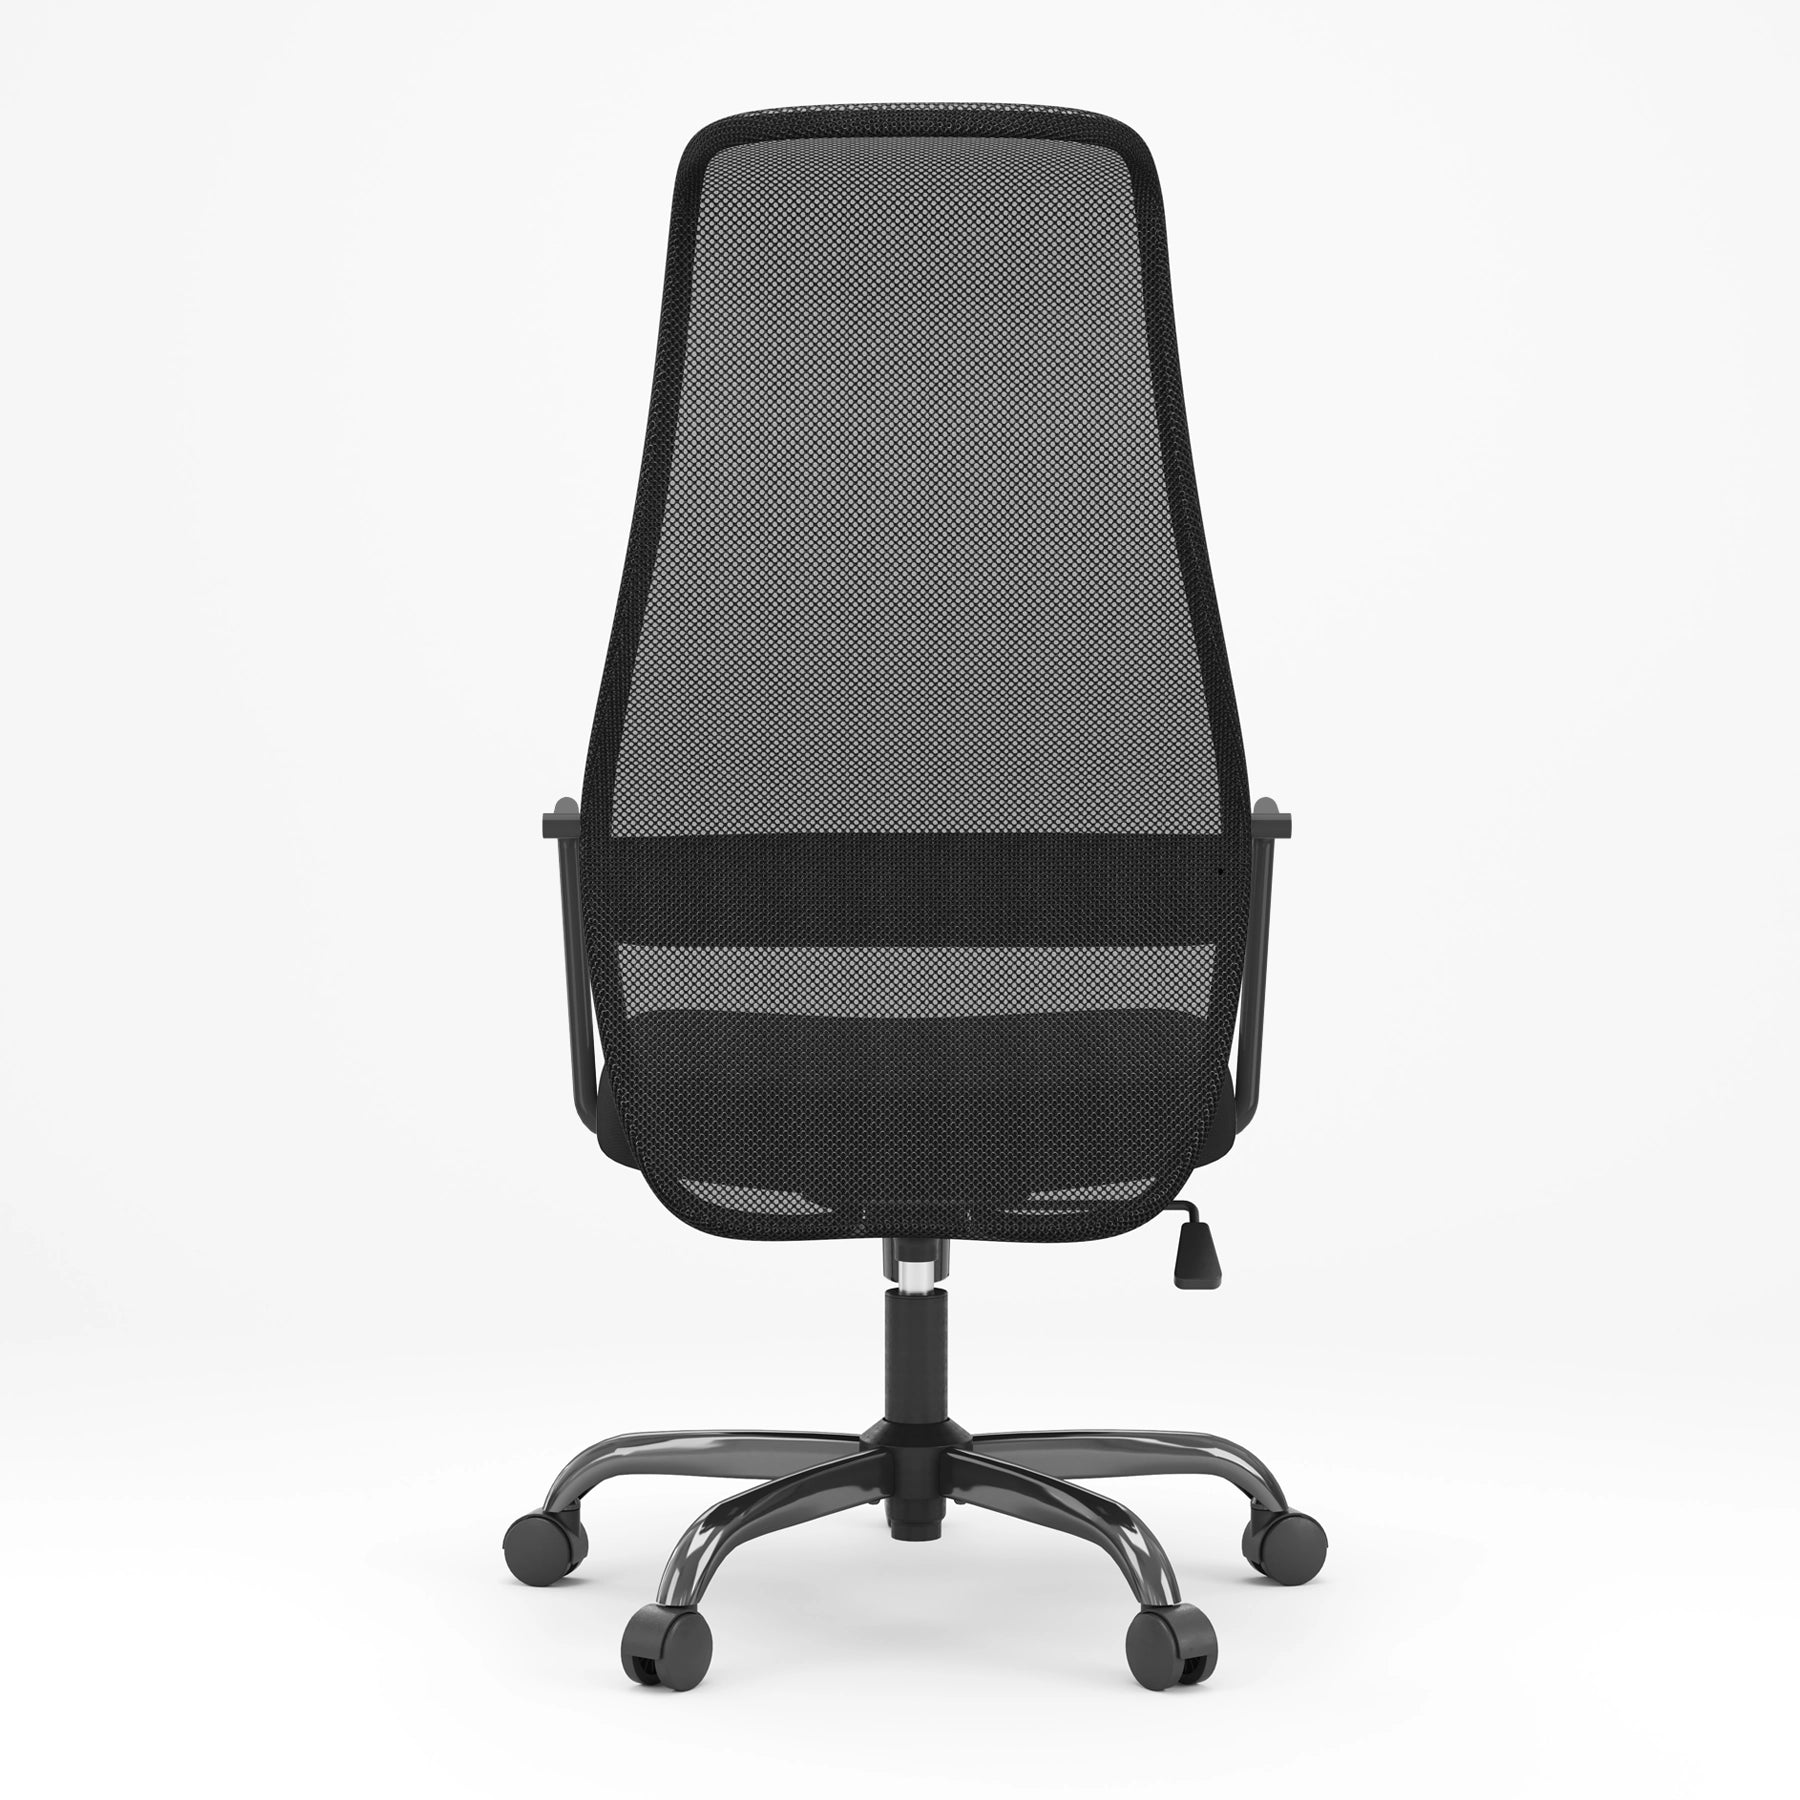 Sihoo M101C High-Back Ergonomic Office Chair with S-Shaped Backrest